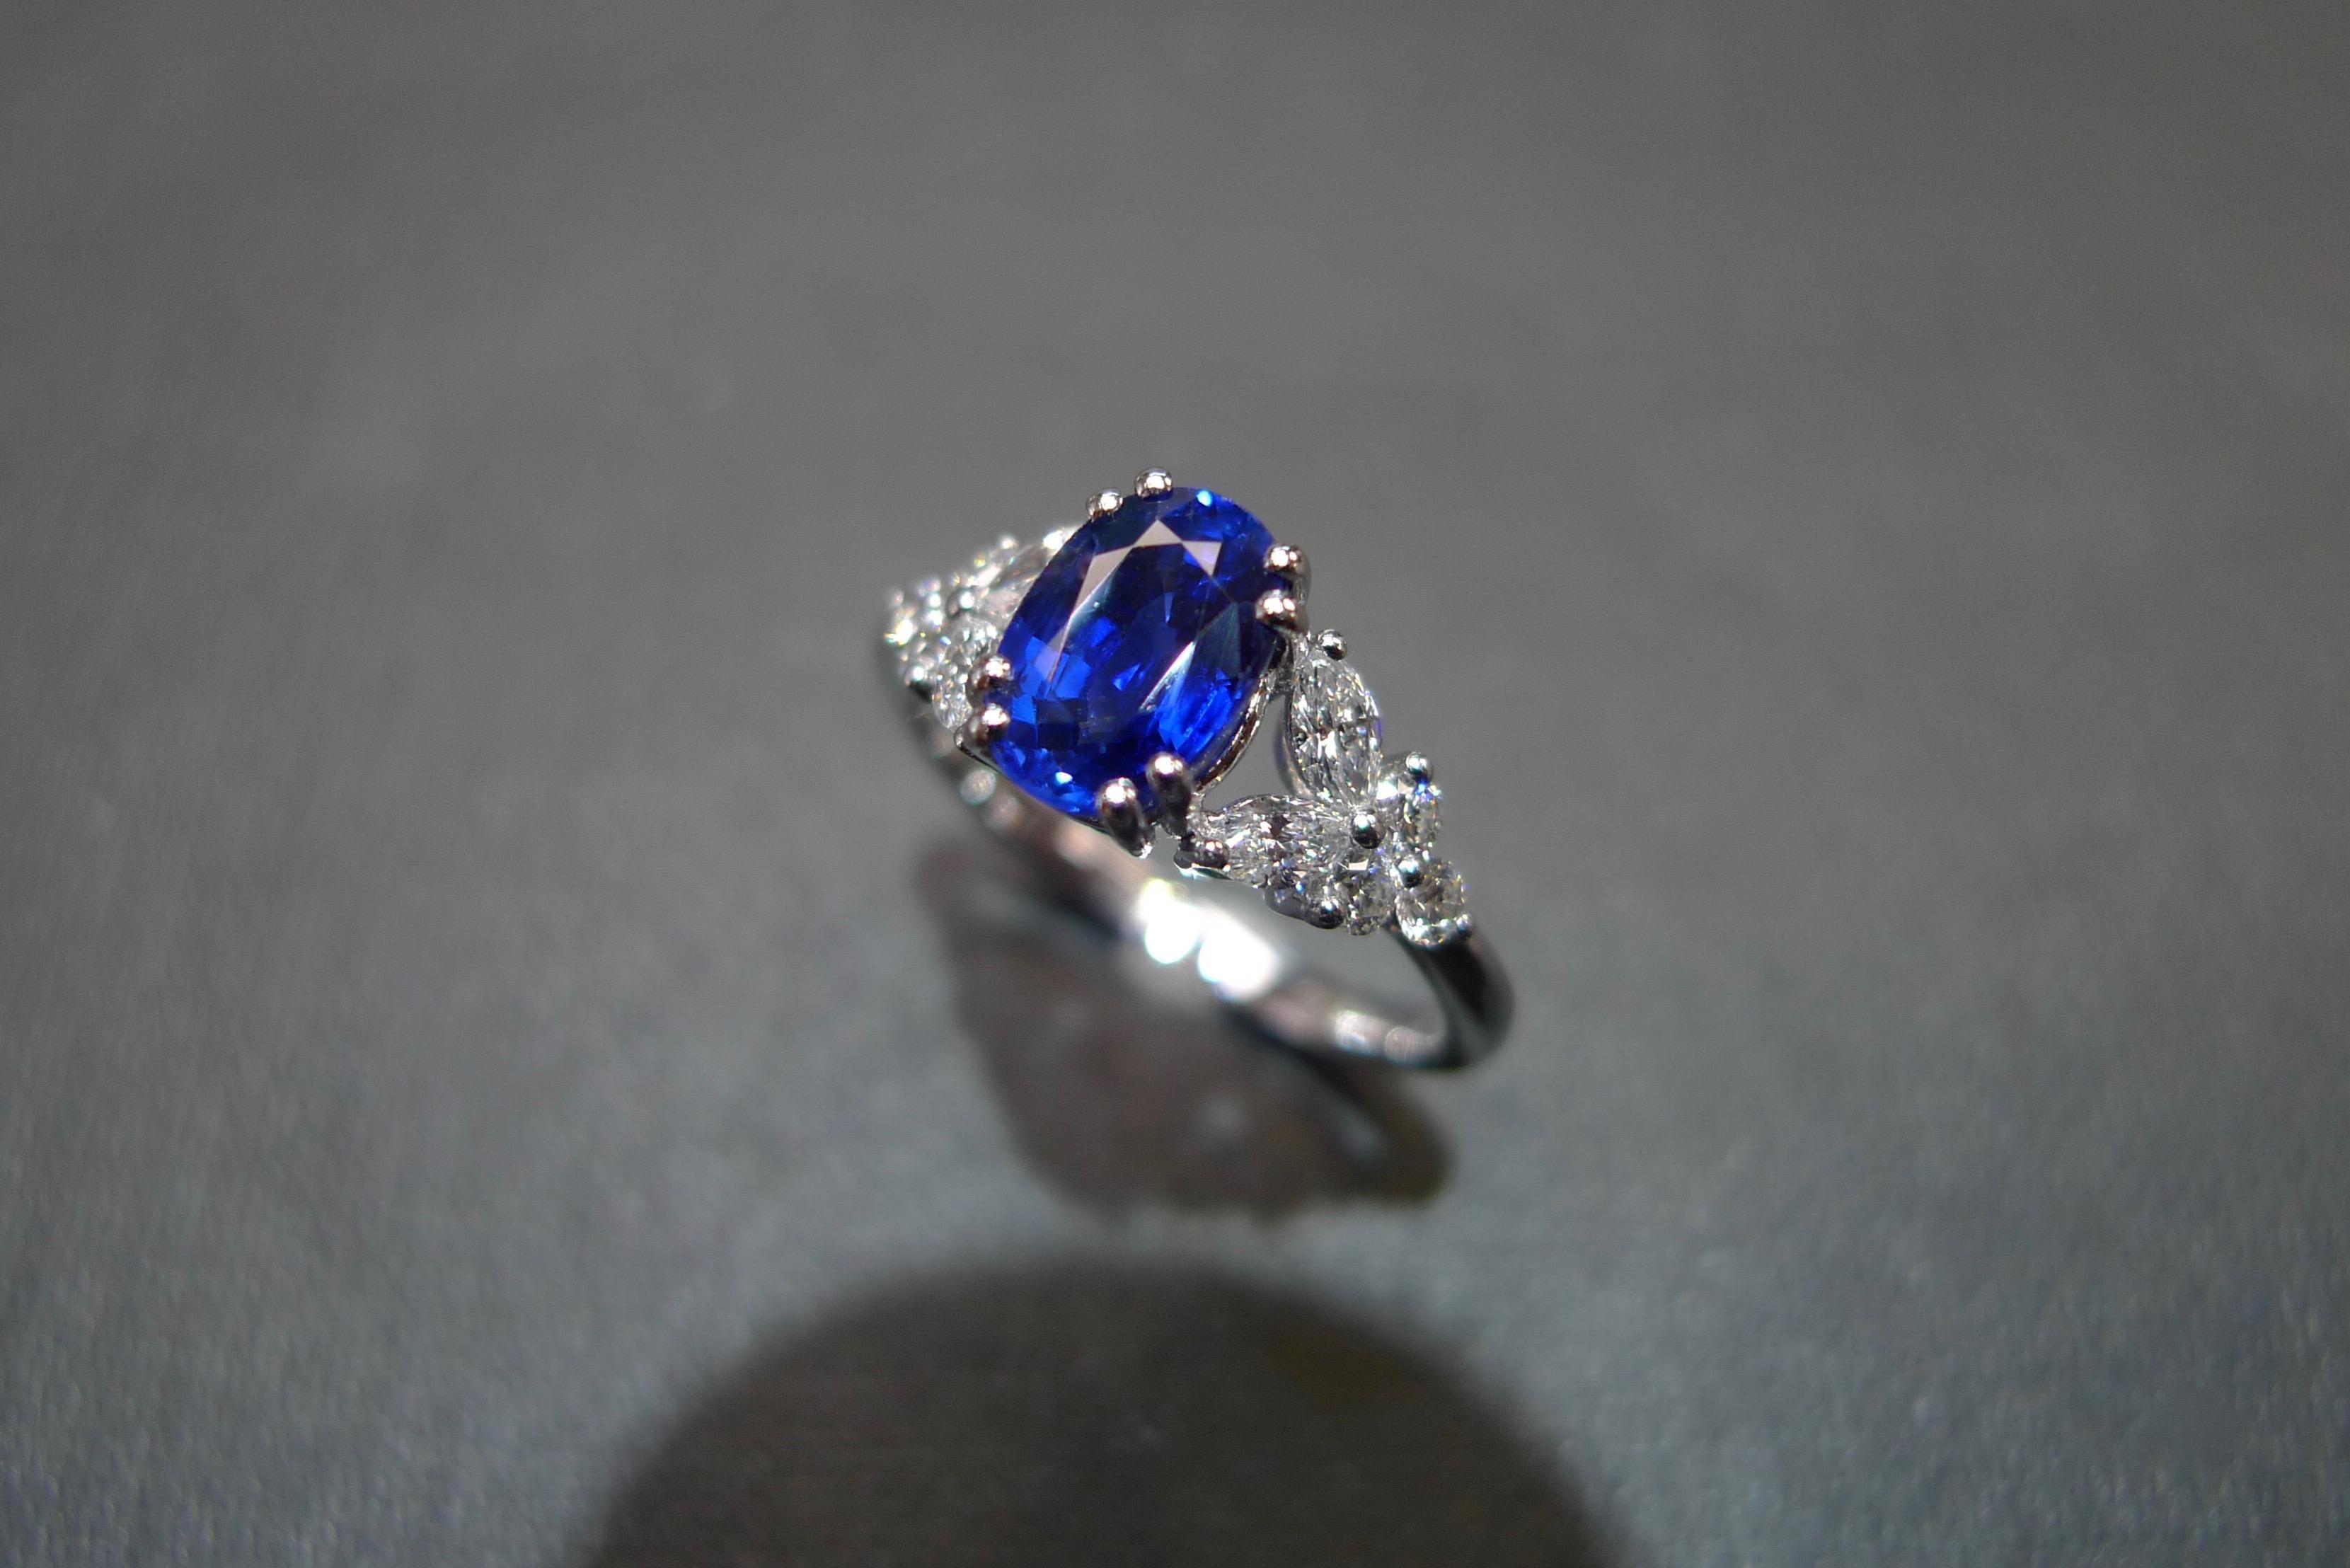 For Sale:  Blue Sapphire Engagement Ring with Marquise Cut Diamond in 18K White Gold 4